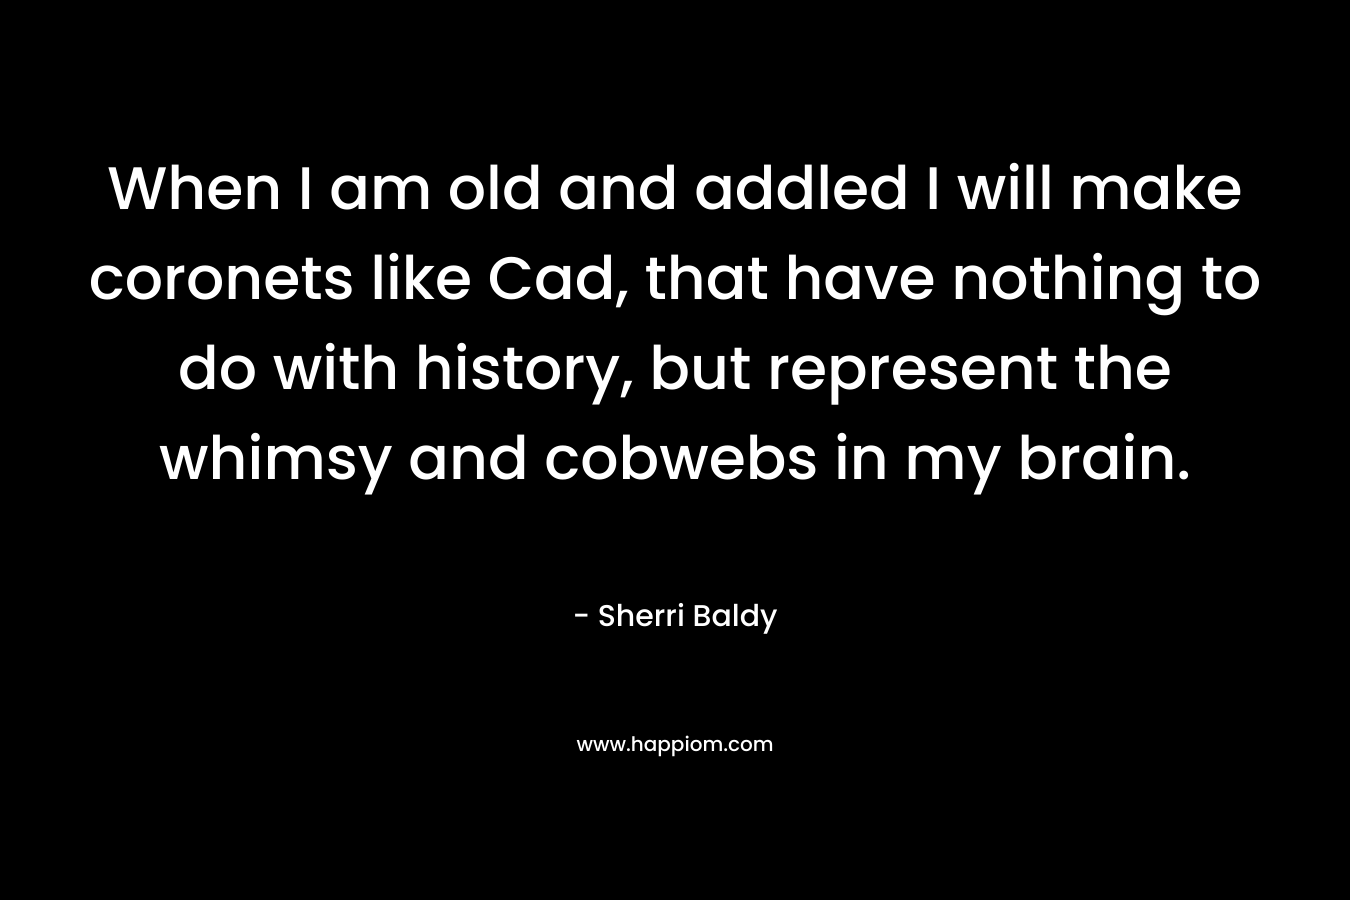 When I am old and addled I will make coronets like Cad, that have nothing to do with history, but represent the whimsy and cobwebs in my brain. – Sherri Baldy